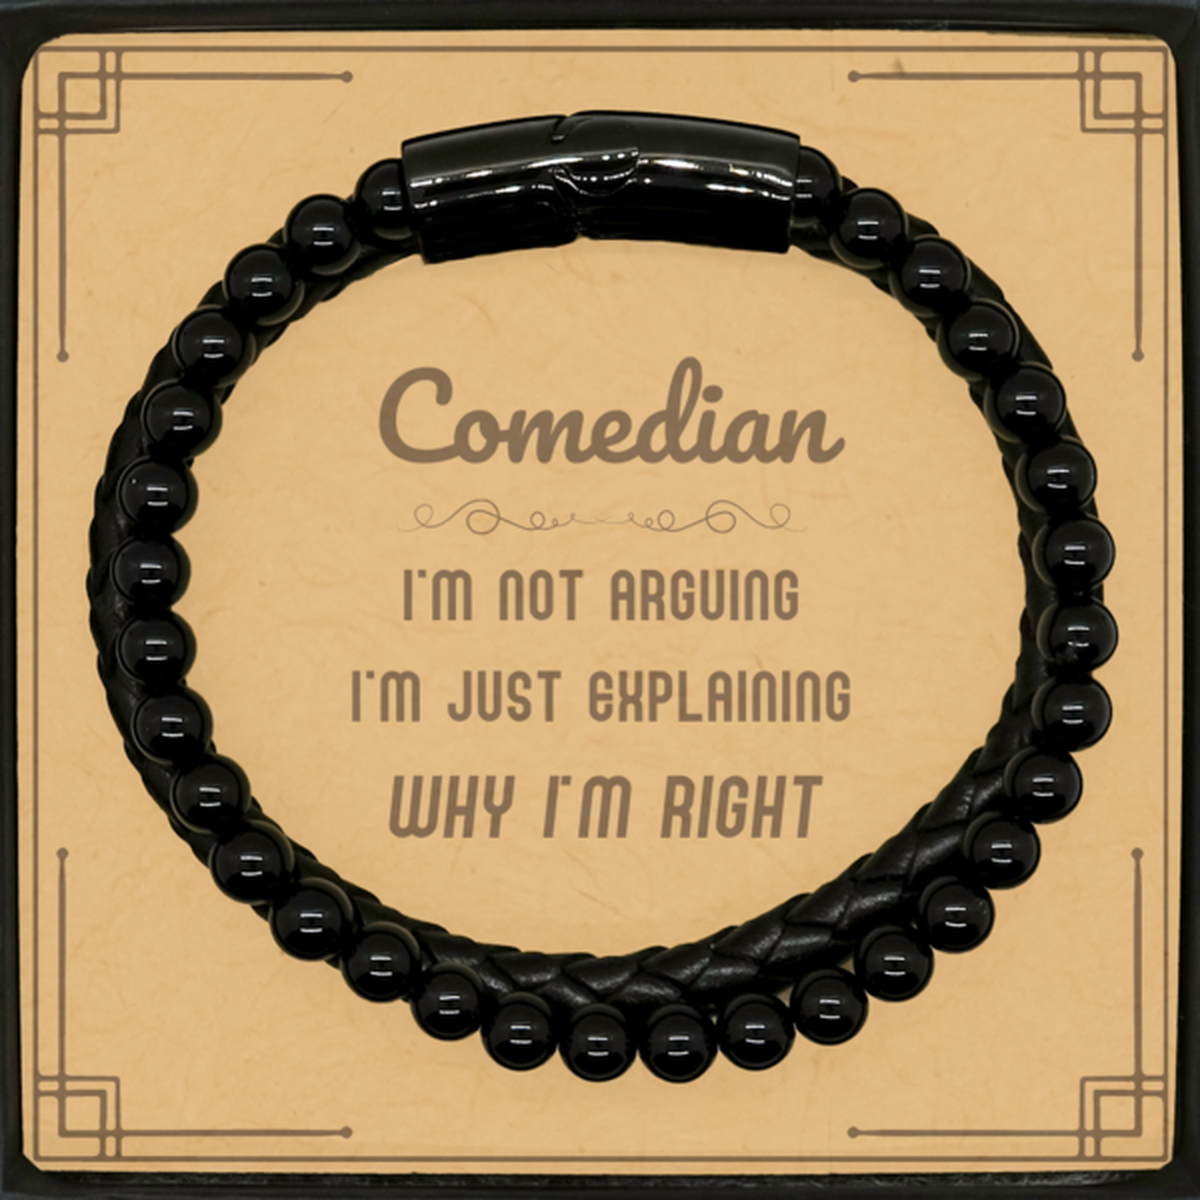 Comedian I'm not Arguing. I'm Just Explaining Why I'm RIGHT Stone Leather Bracelets, Funny Saying Quote Comedian Gifts For Comedian Message Card Graduation Birthday Christmas Gifts for Men Women Coworker